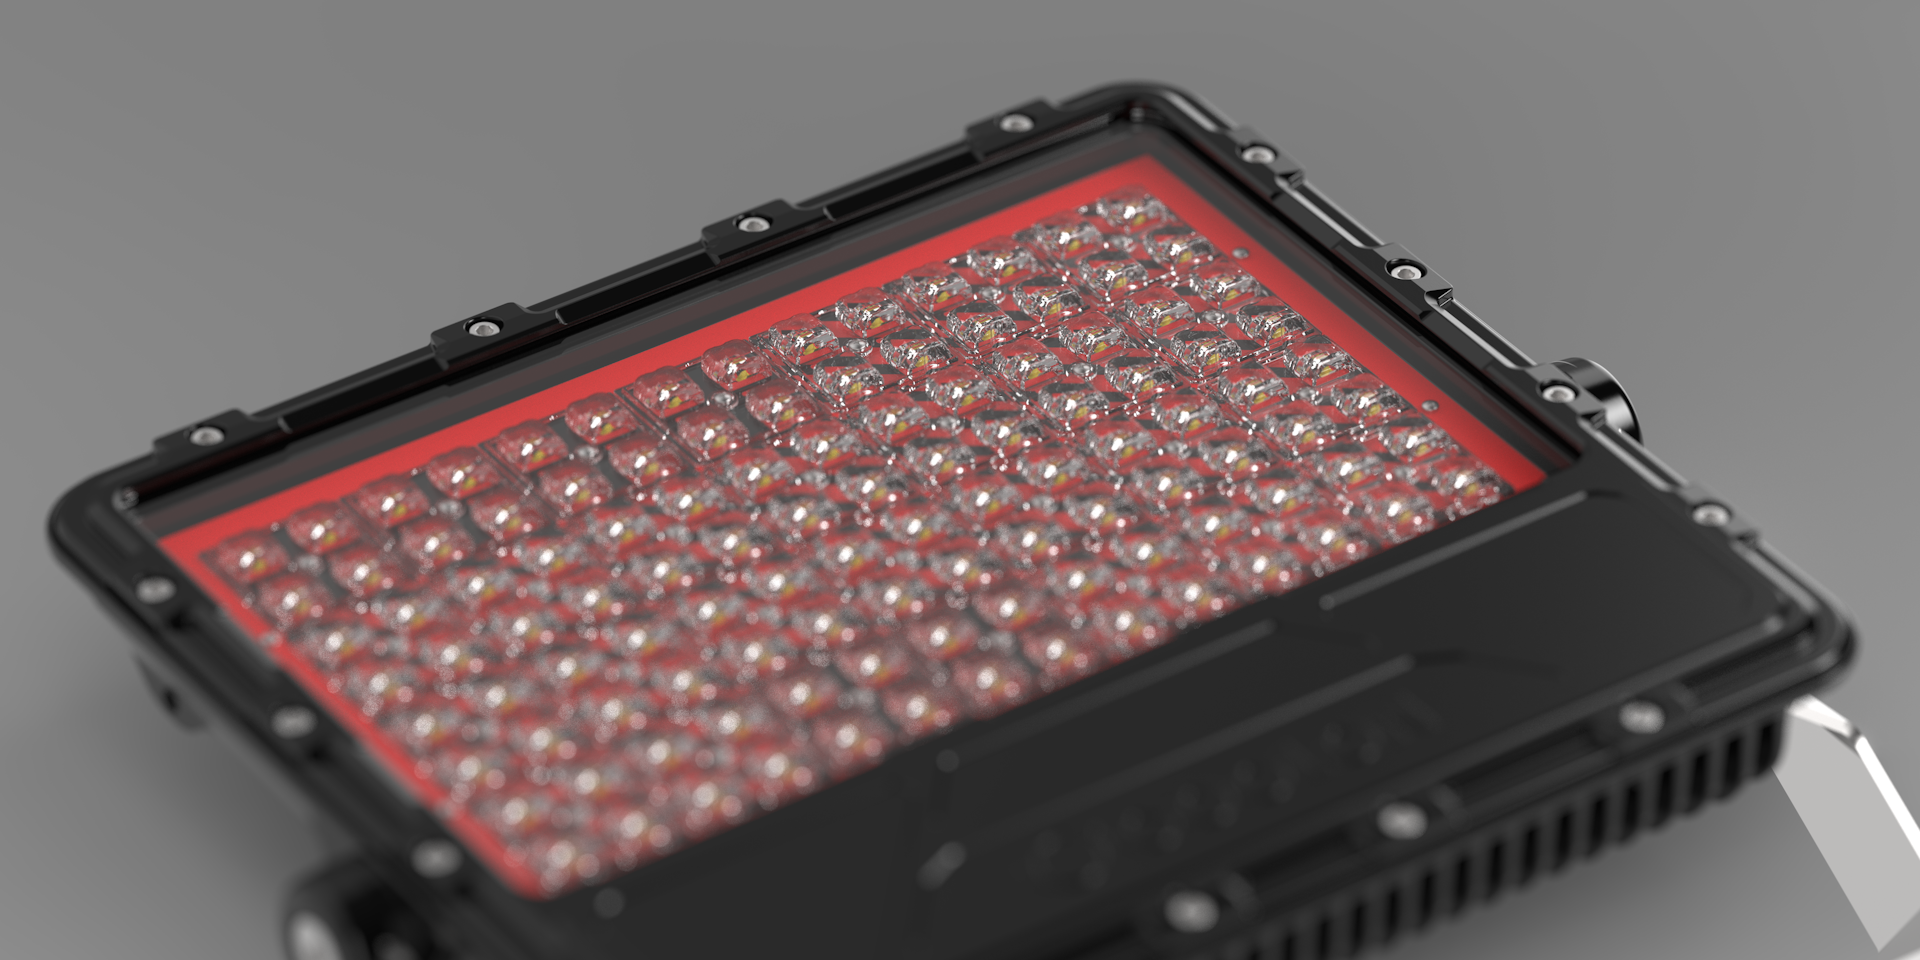 Close up photo of Cassidy LED Flood Light, individual high quality optics are clearly visible